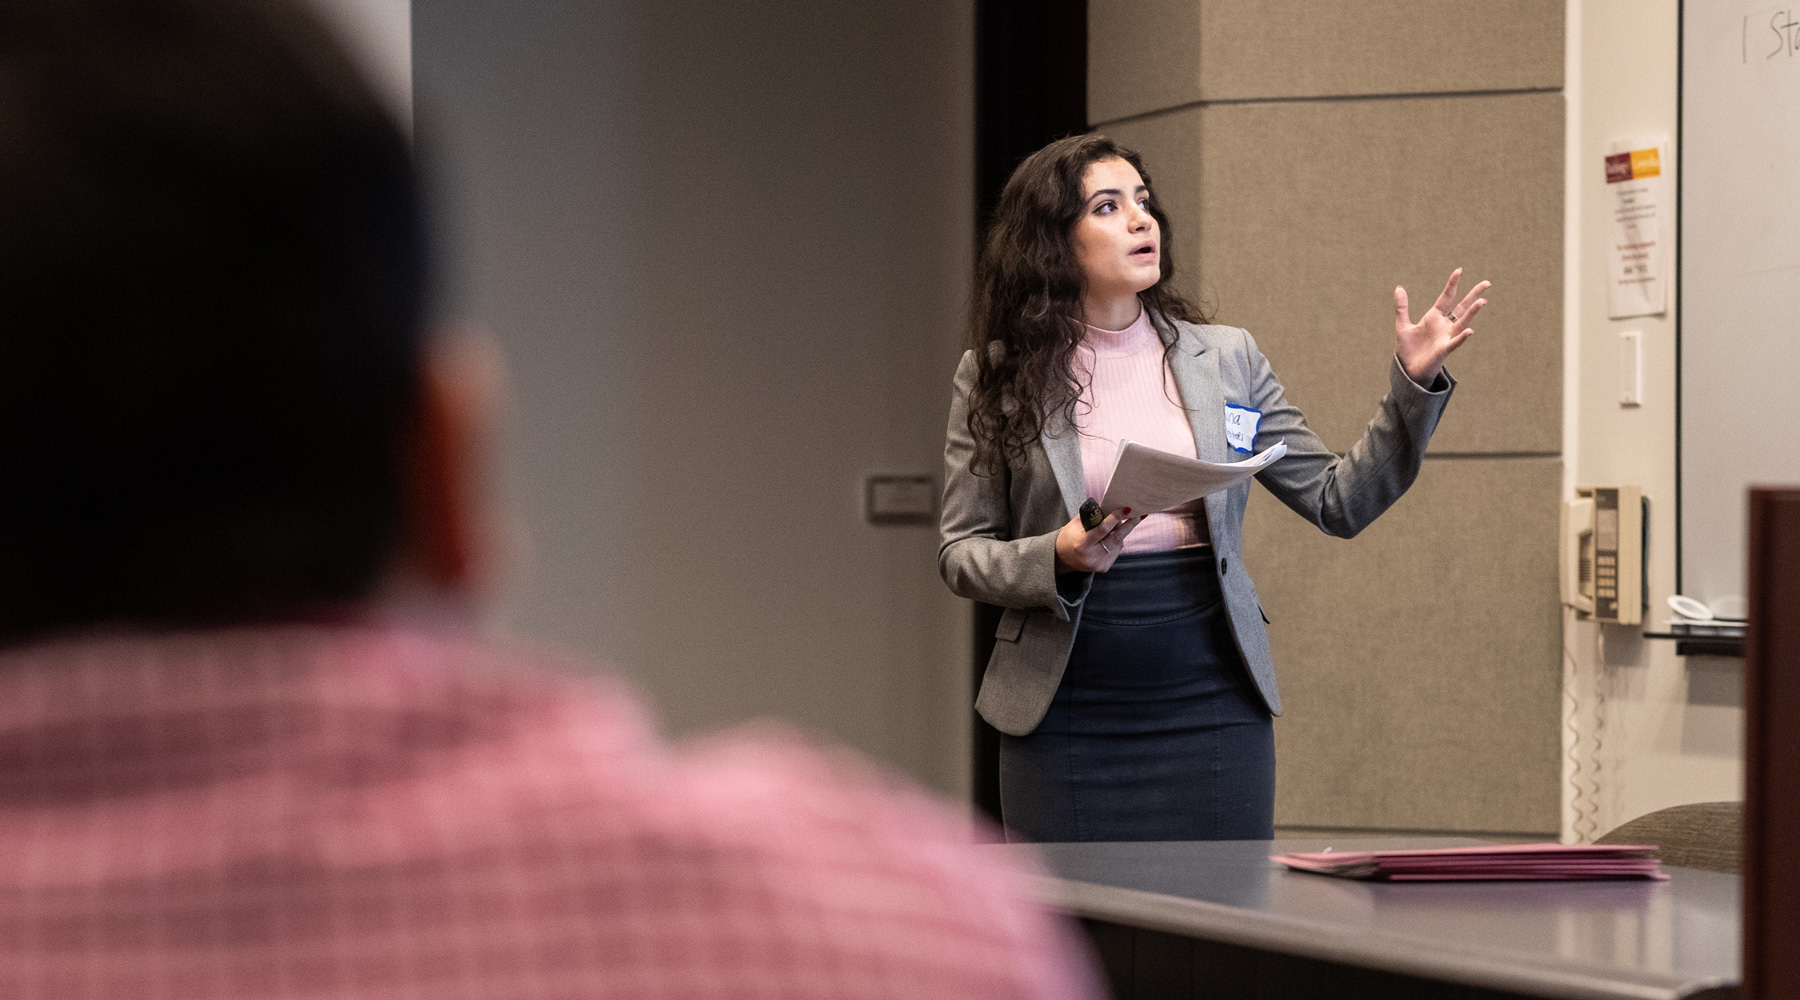 President's Medallion winner Juana Fonseca gives a presentation during a training event. (Photo: Lukas Keapproth)